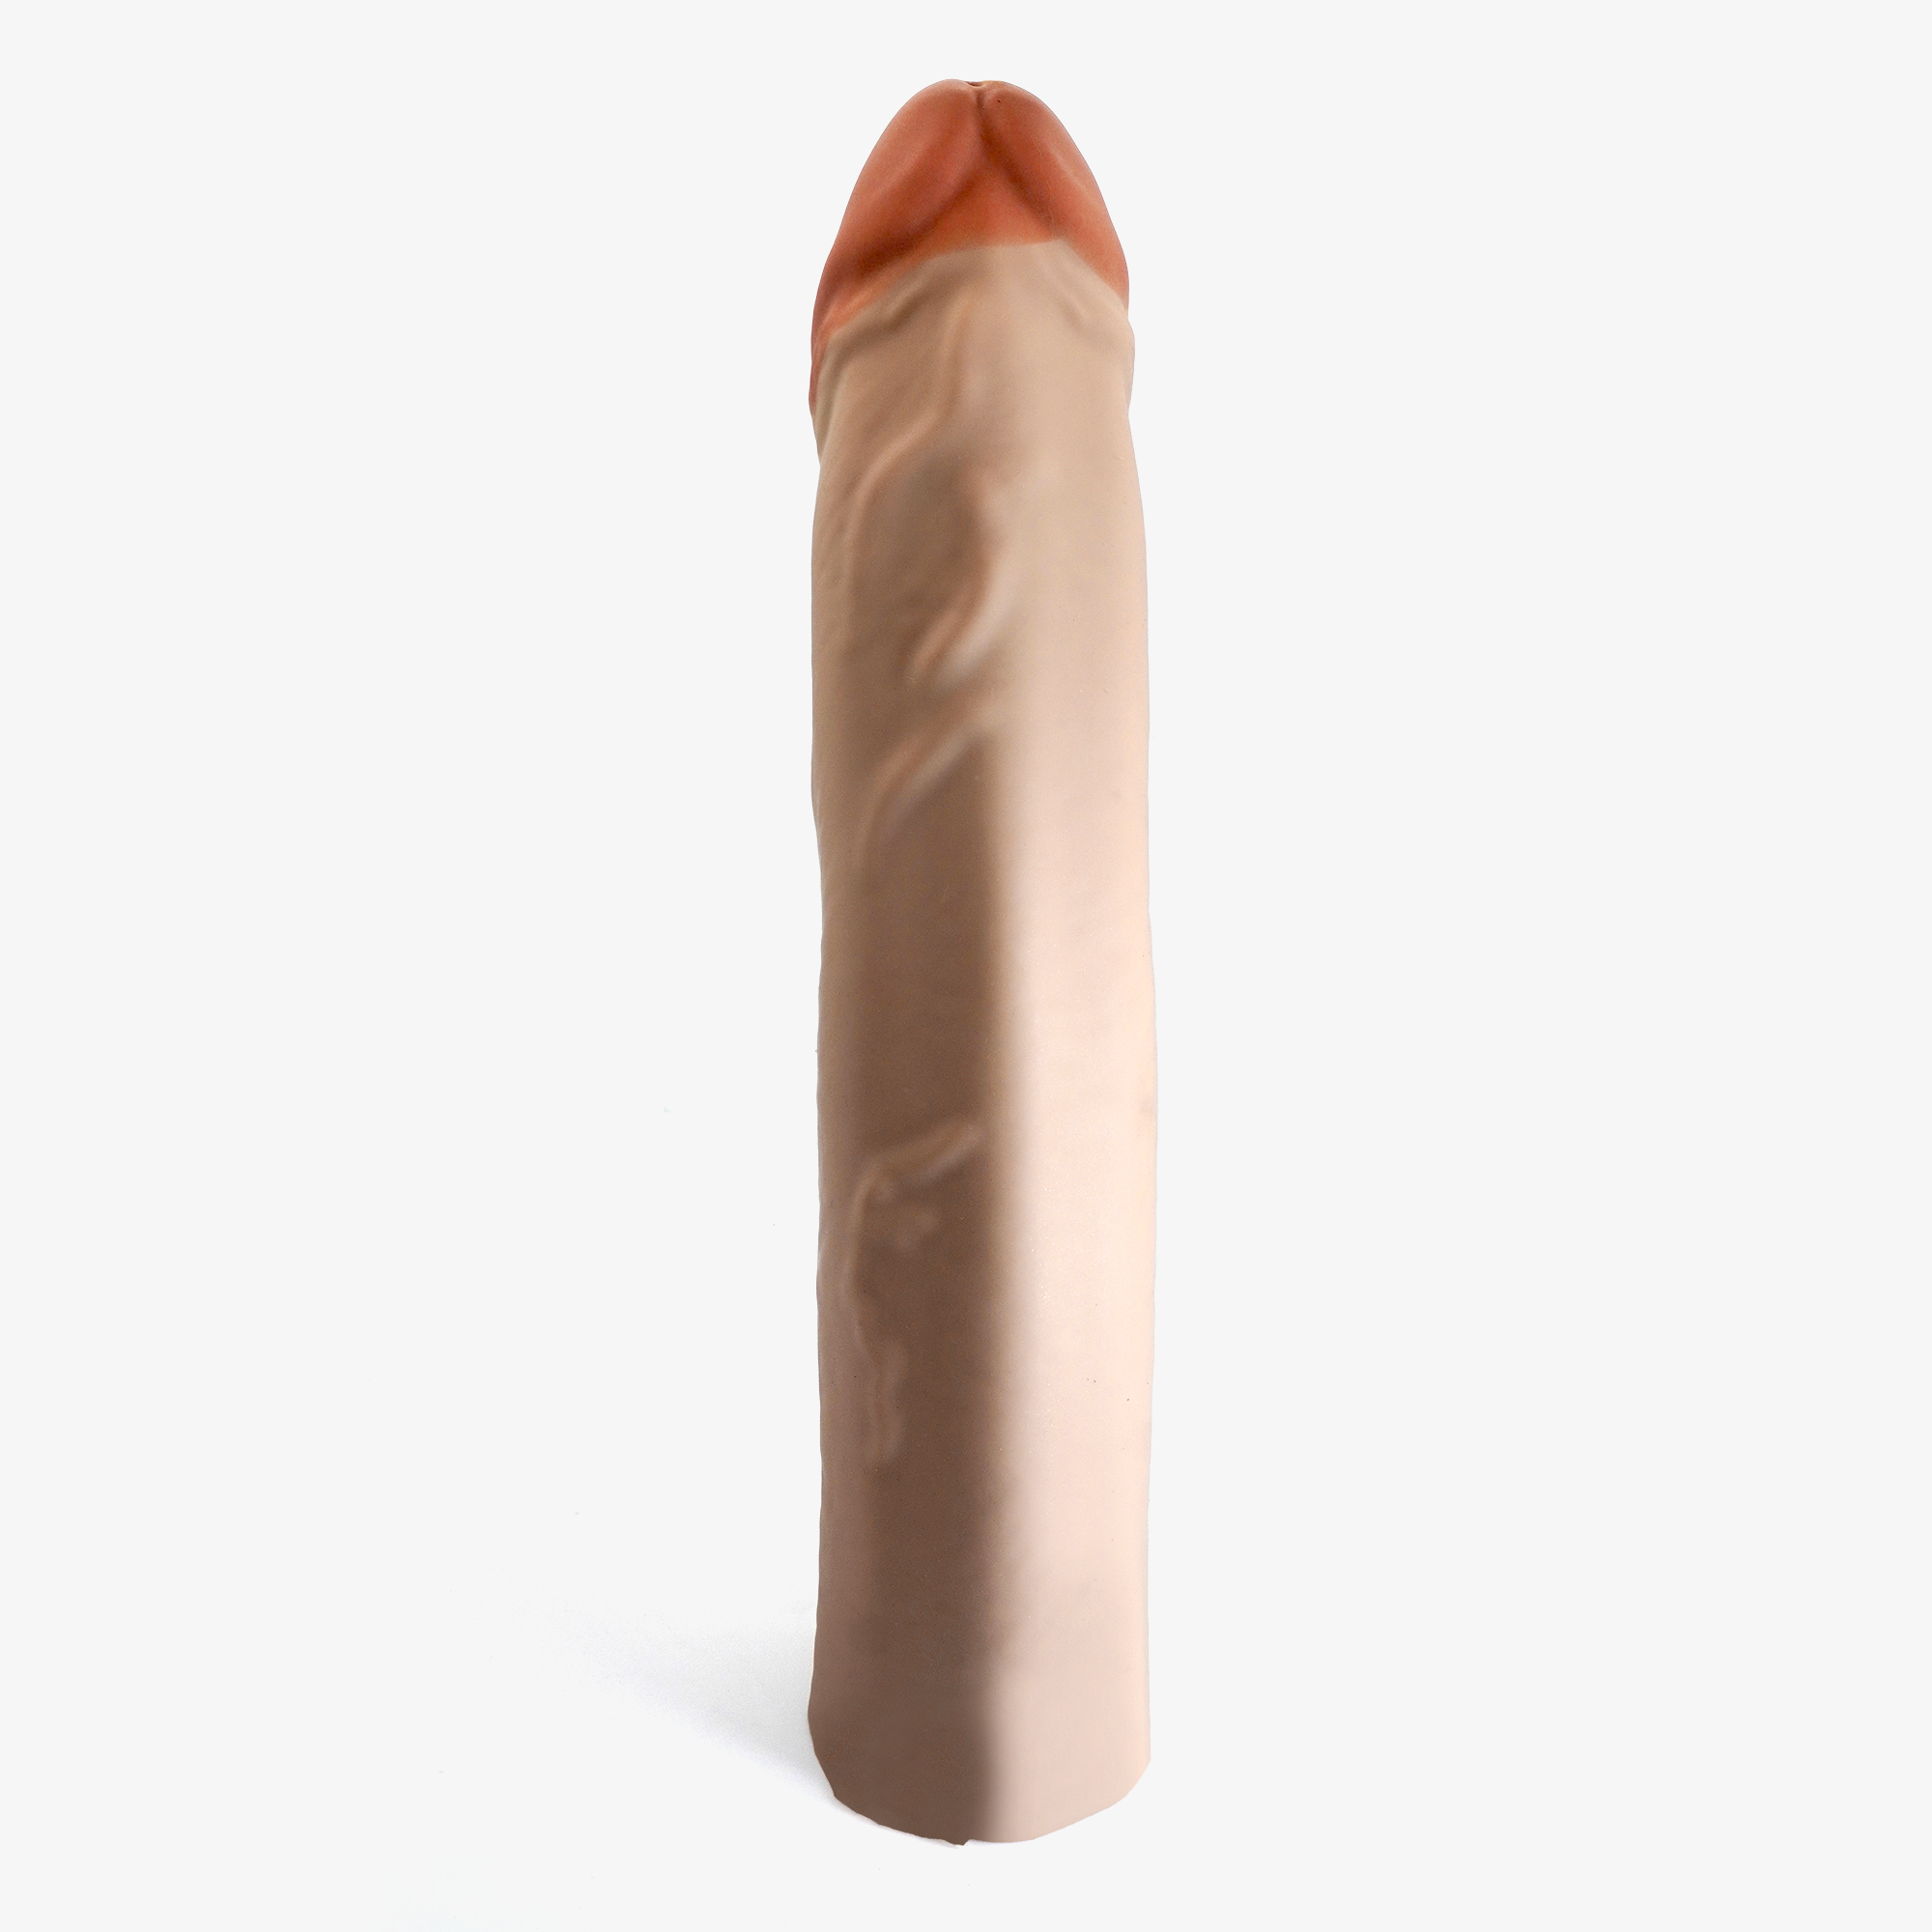 The Made To Measure Slim Penis Extender